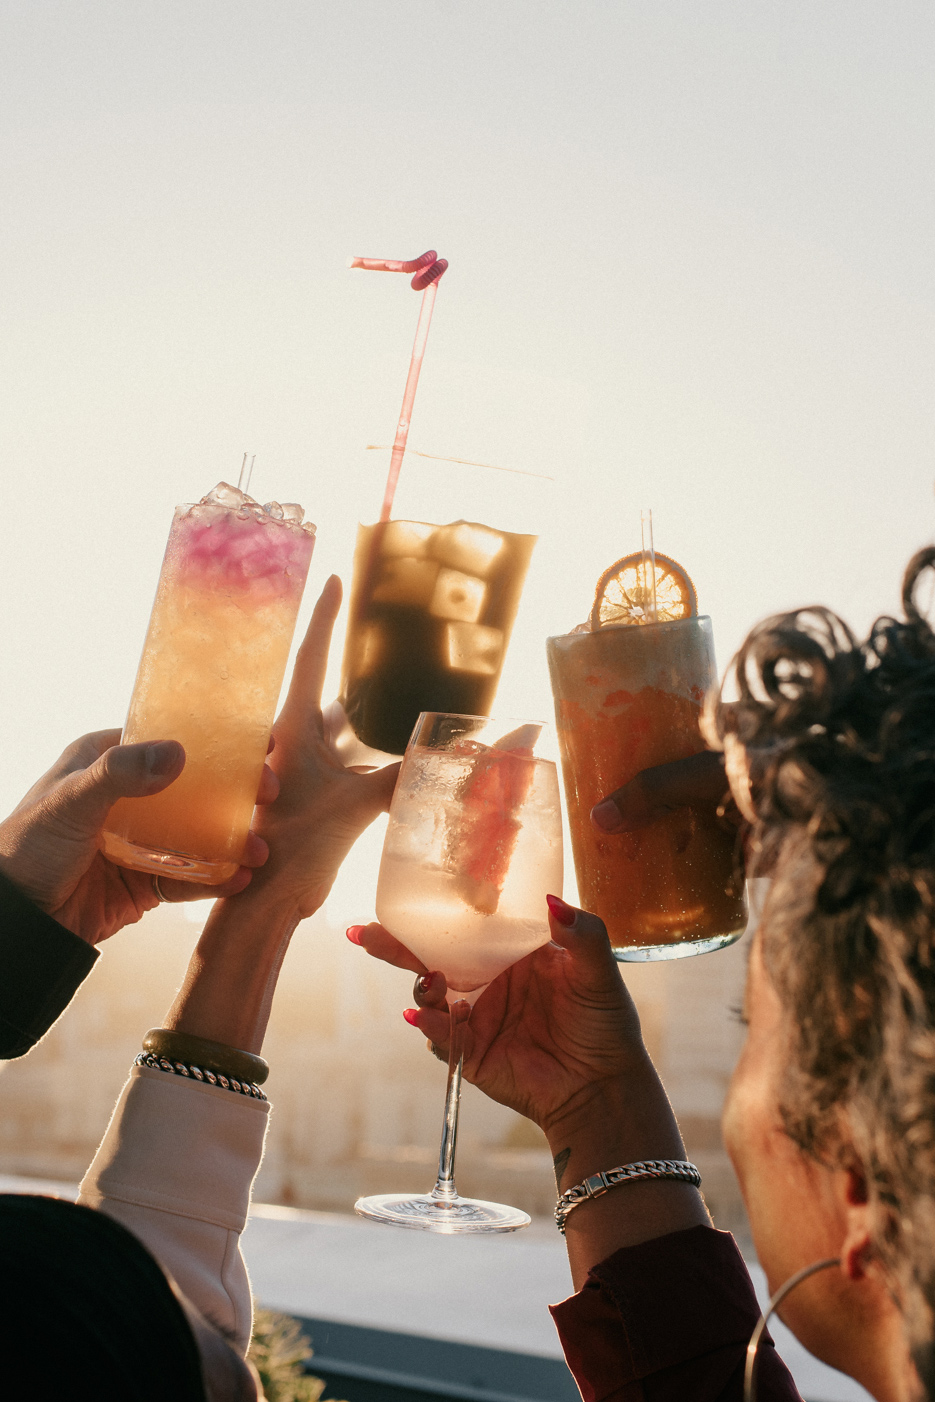 People raise their cocktail glasses in jubilation on the rooftop.